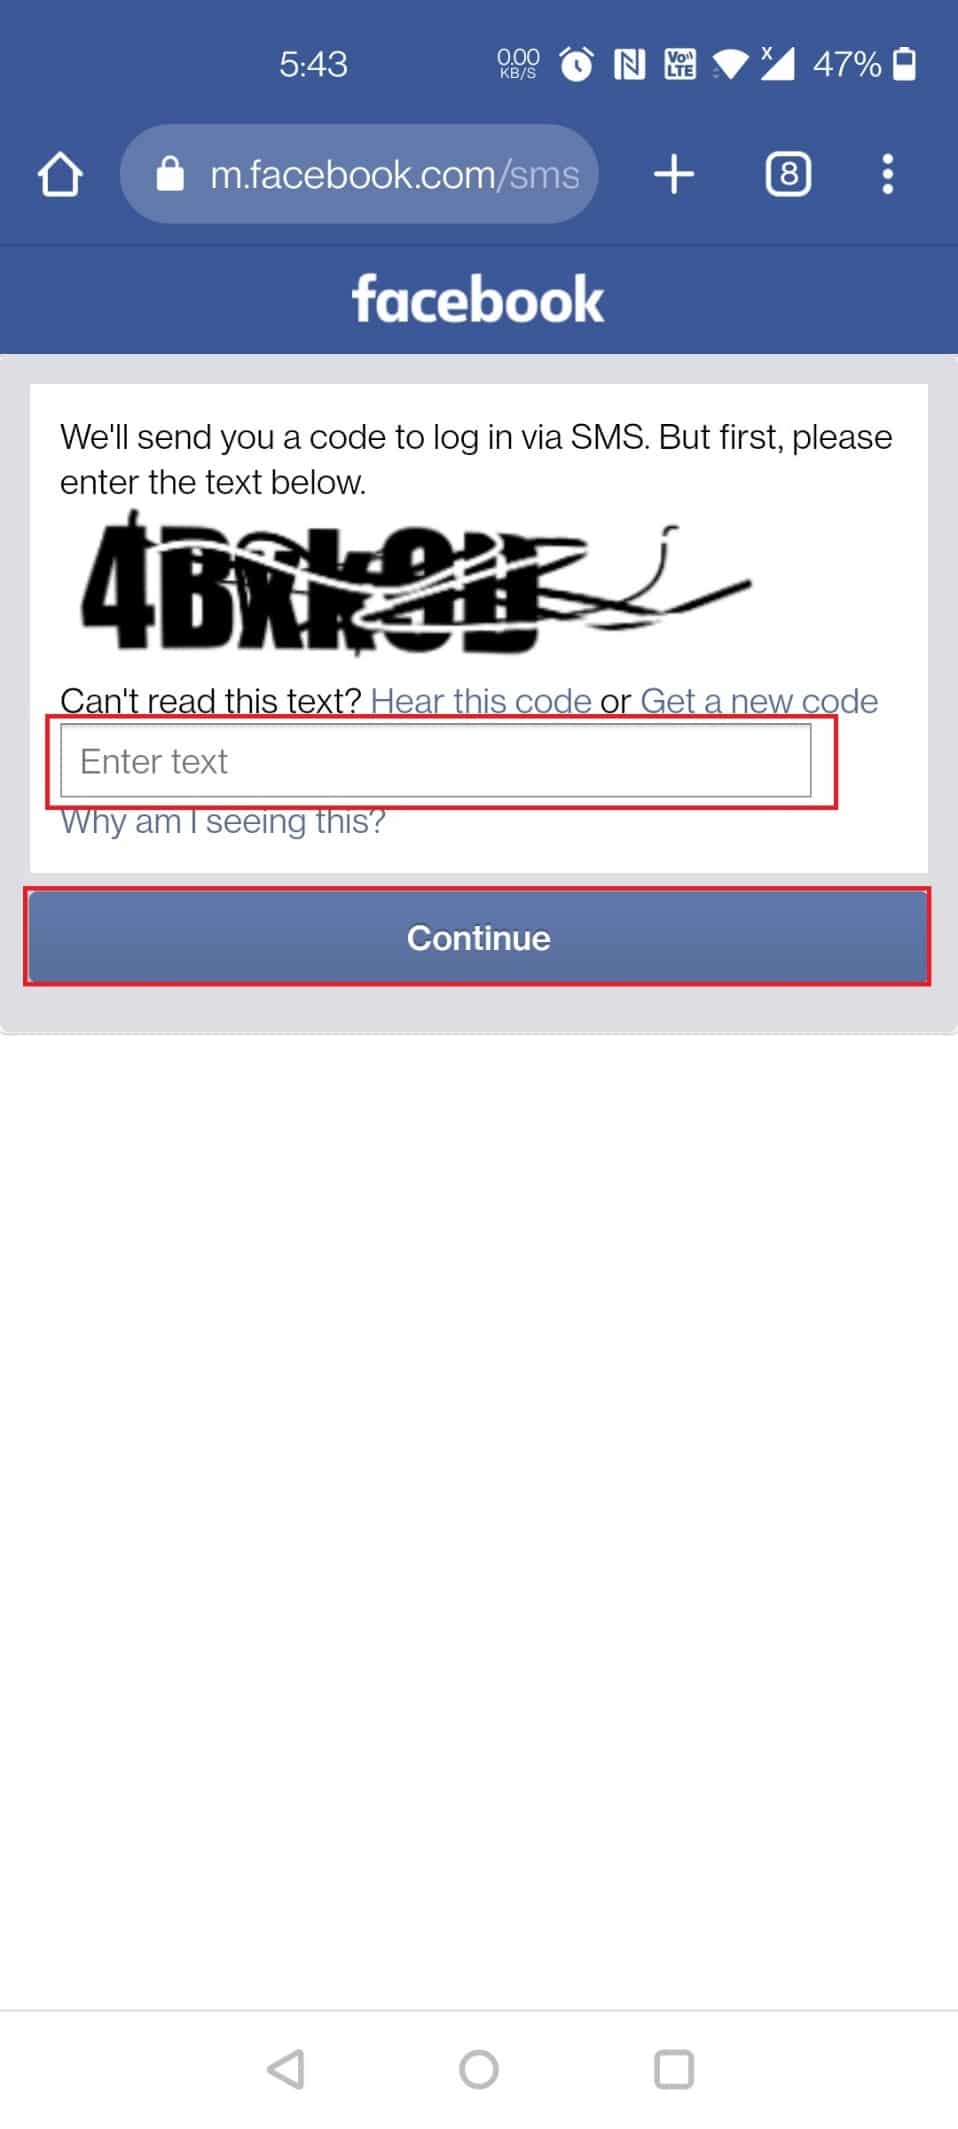 Enter the captcha text and tap on Continue | I want my old Facebook account back